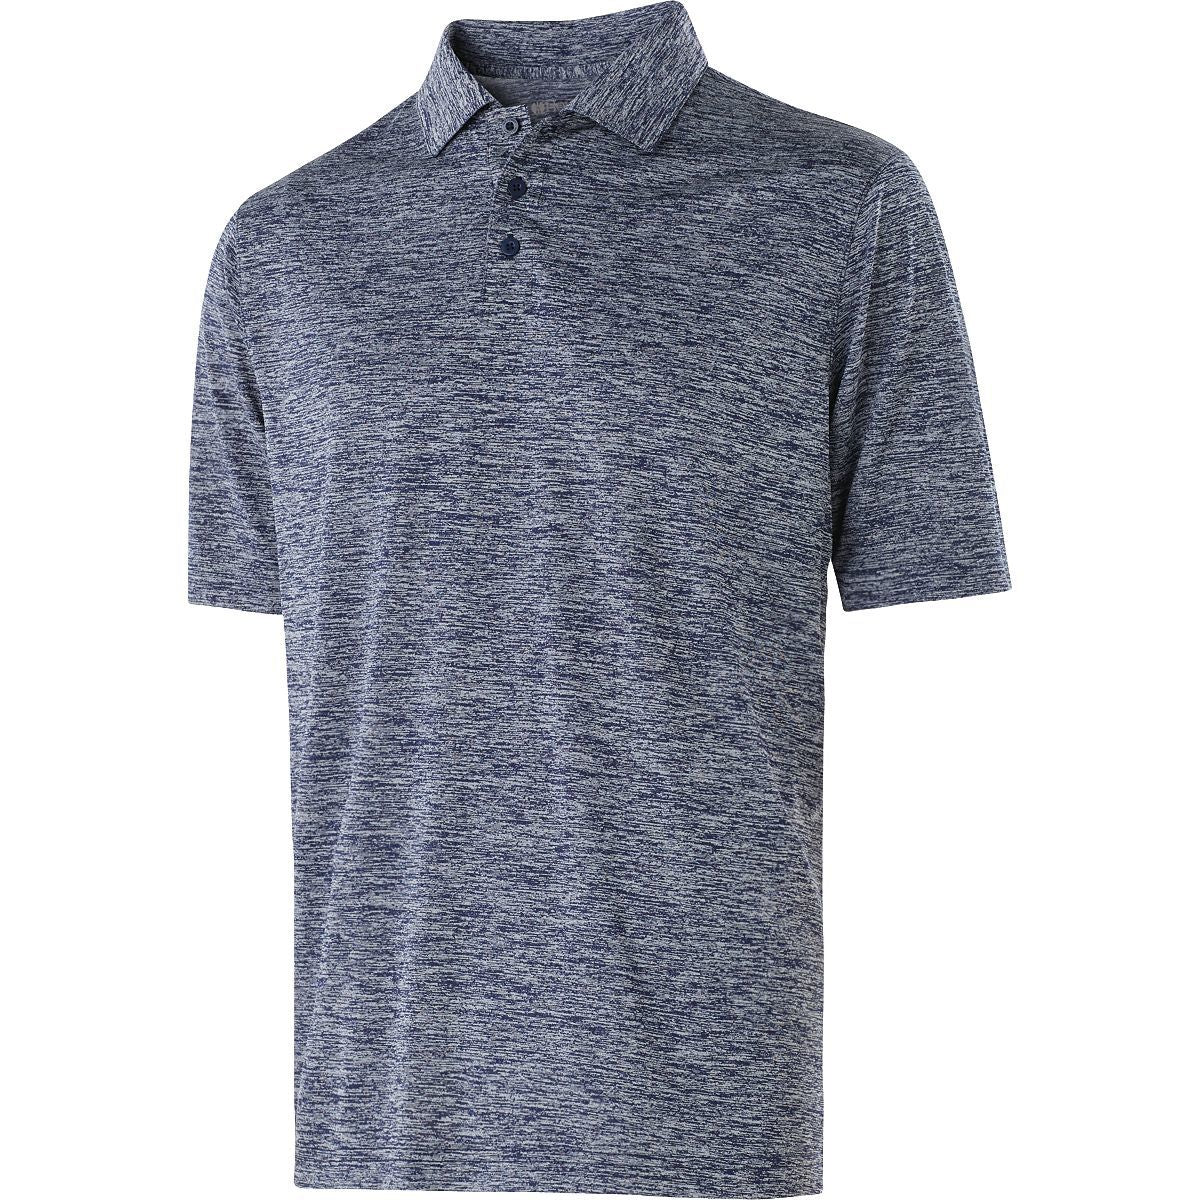 Holloway Electrify 2.0 Polo in Navy Heather  -Part of the Adult, Adult-Polos, Polos, Holloway, Shirts product lines at KanaleyCreations.com